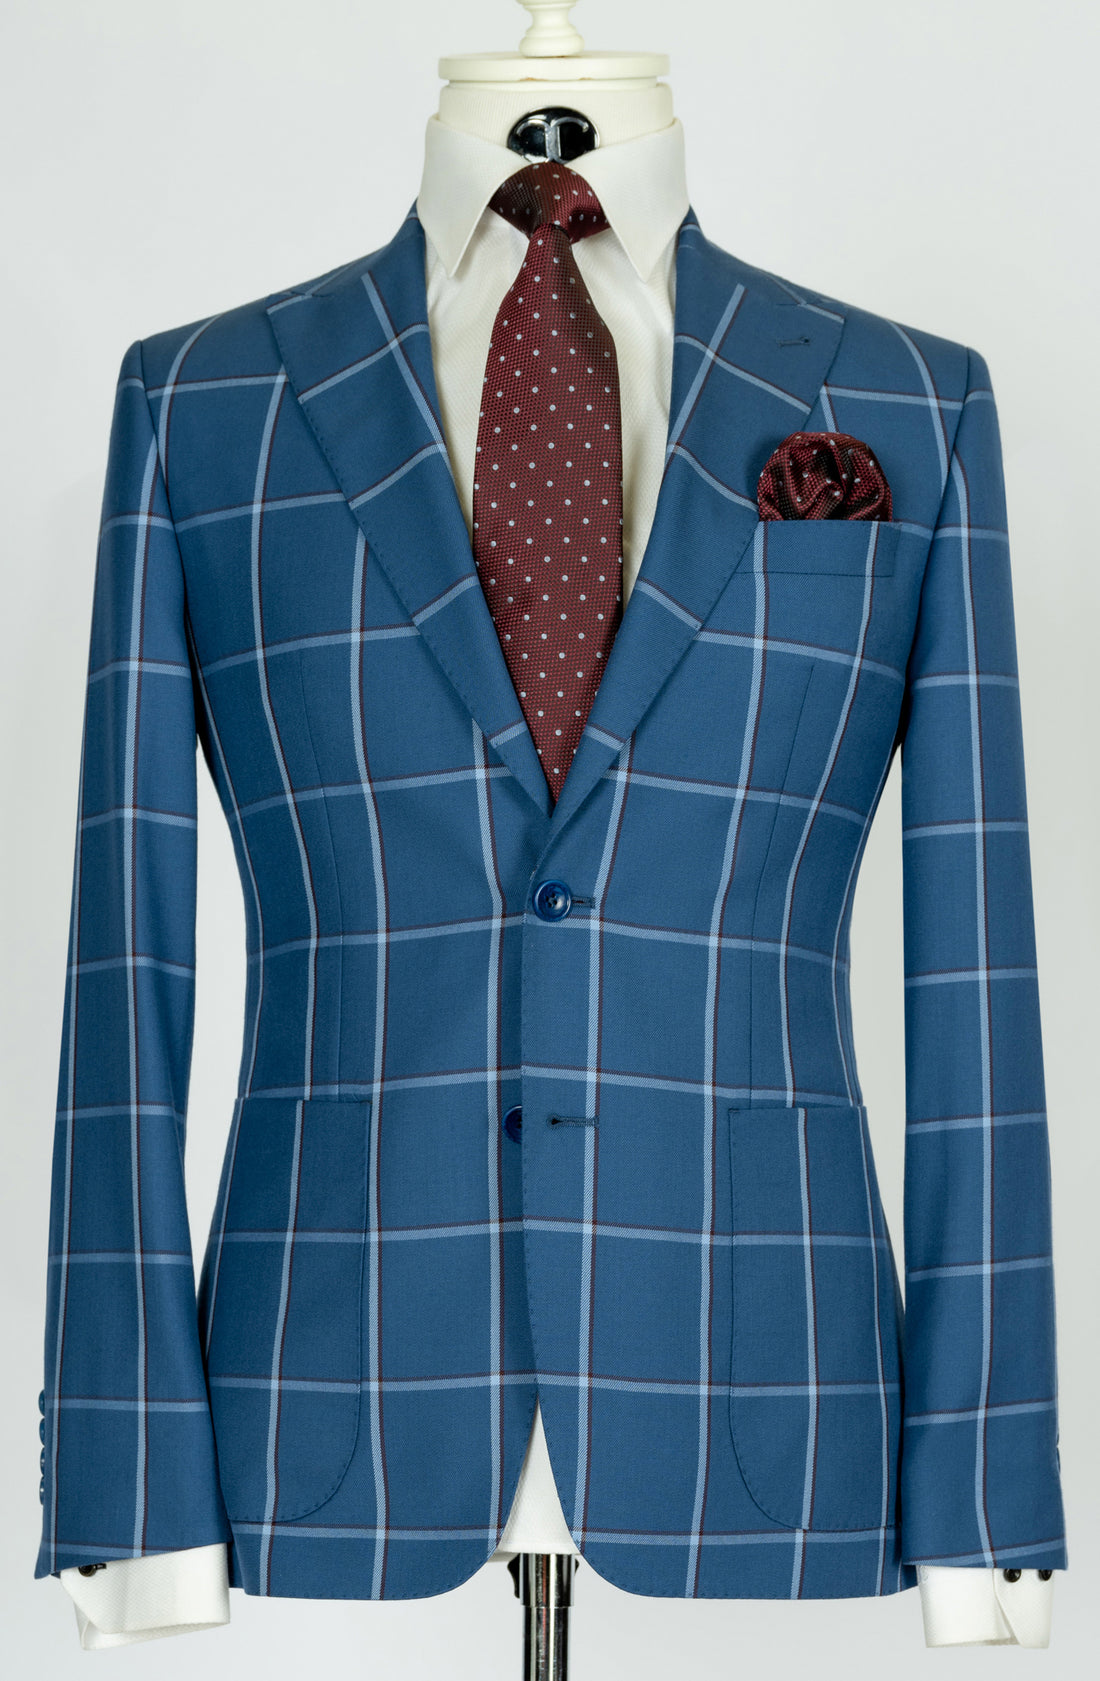 Tollegno - Blue windowpane 2-piece slim fit suit with patch pockets